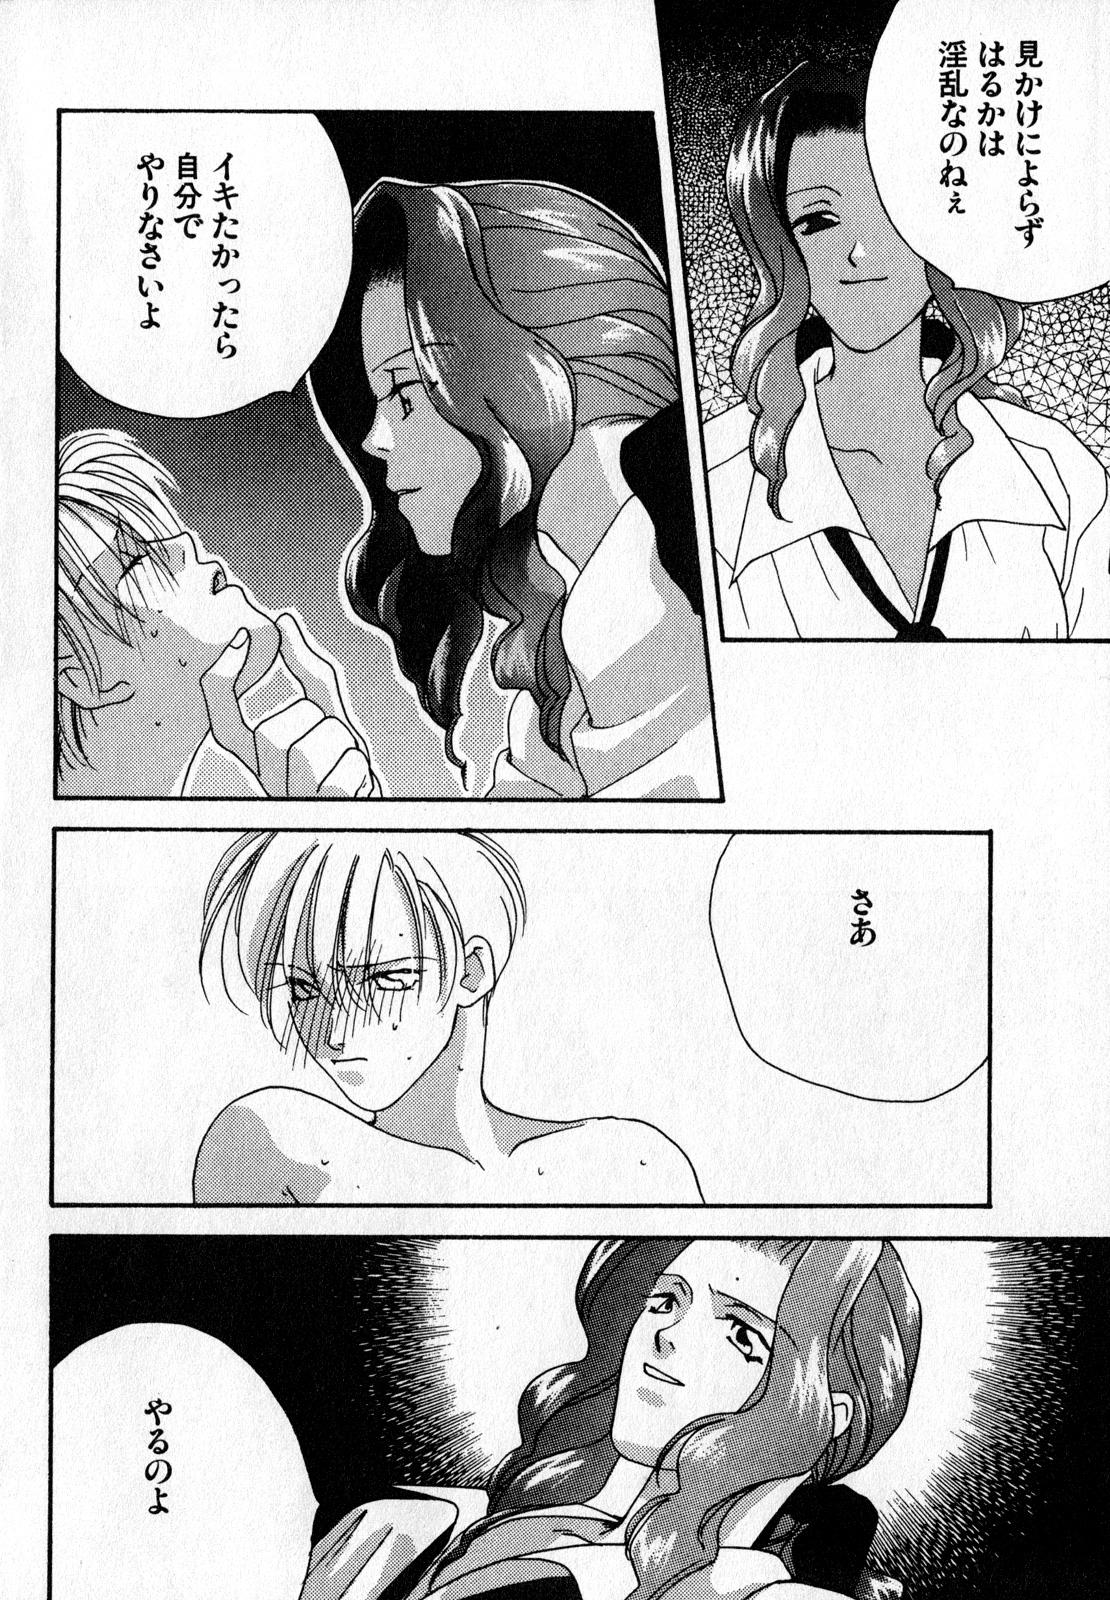 Love Lunatic Party 7 - Sailor moon Famosa - Page 7